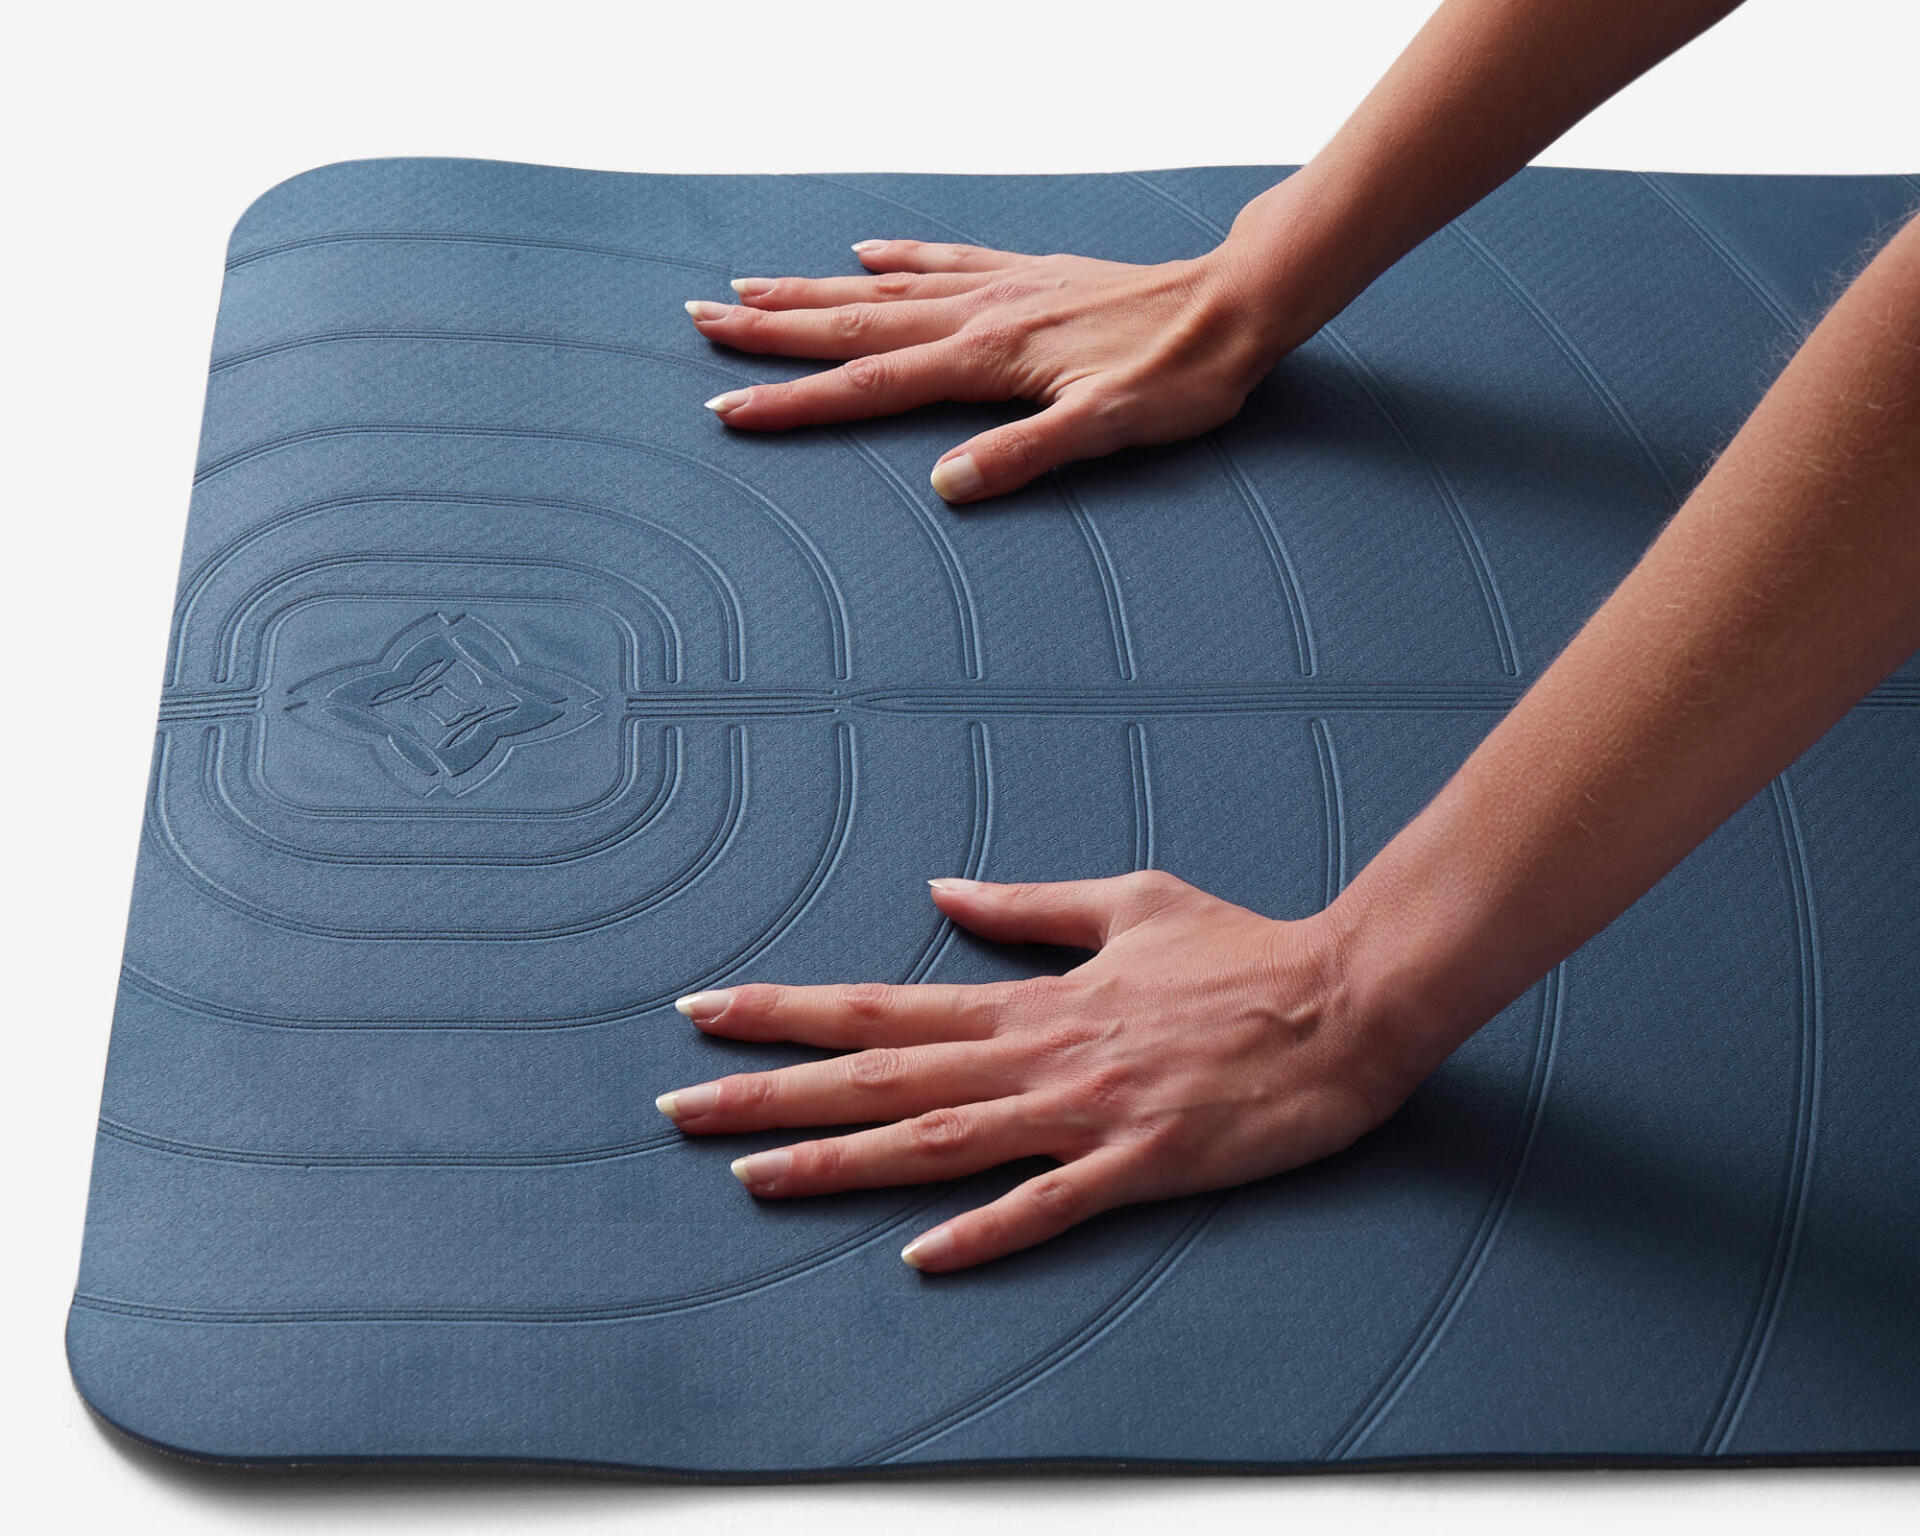 Hands on a yoga mat for a relaxing pose